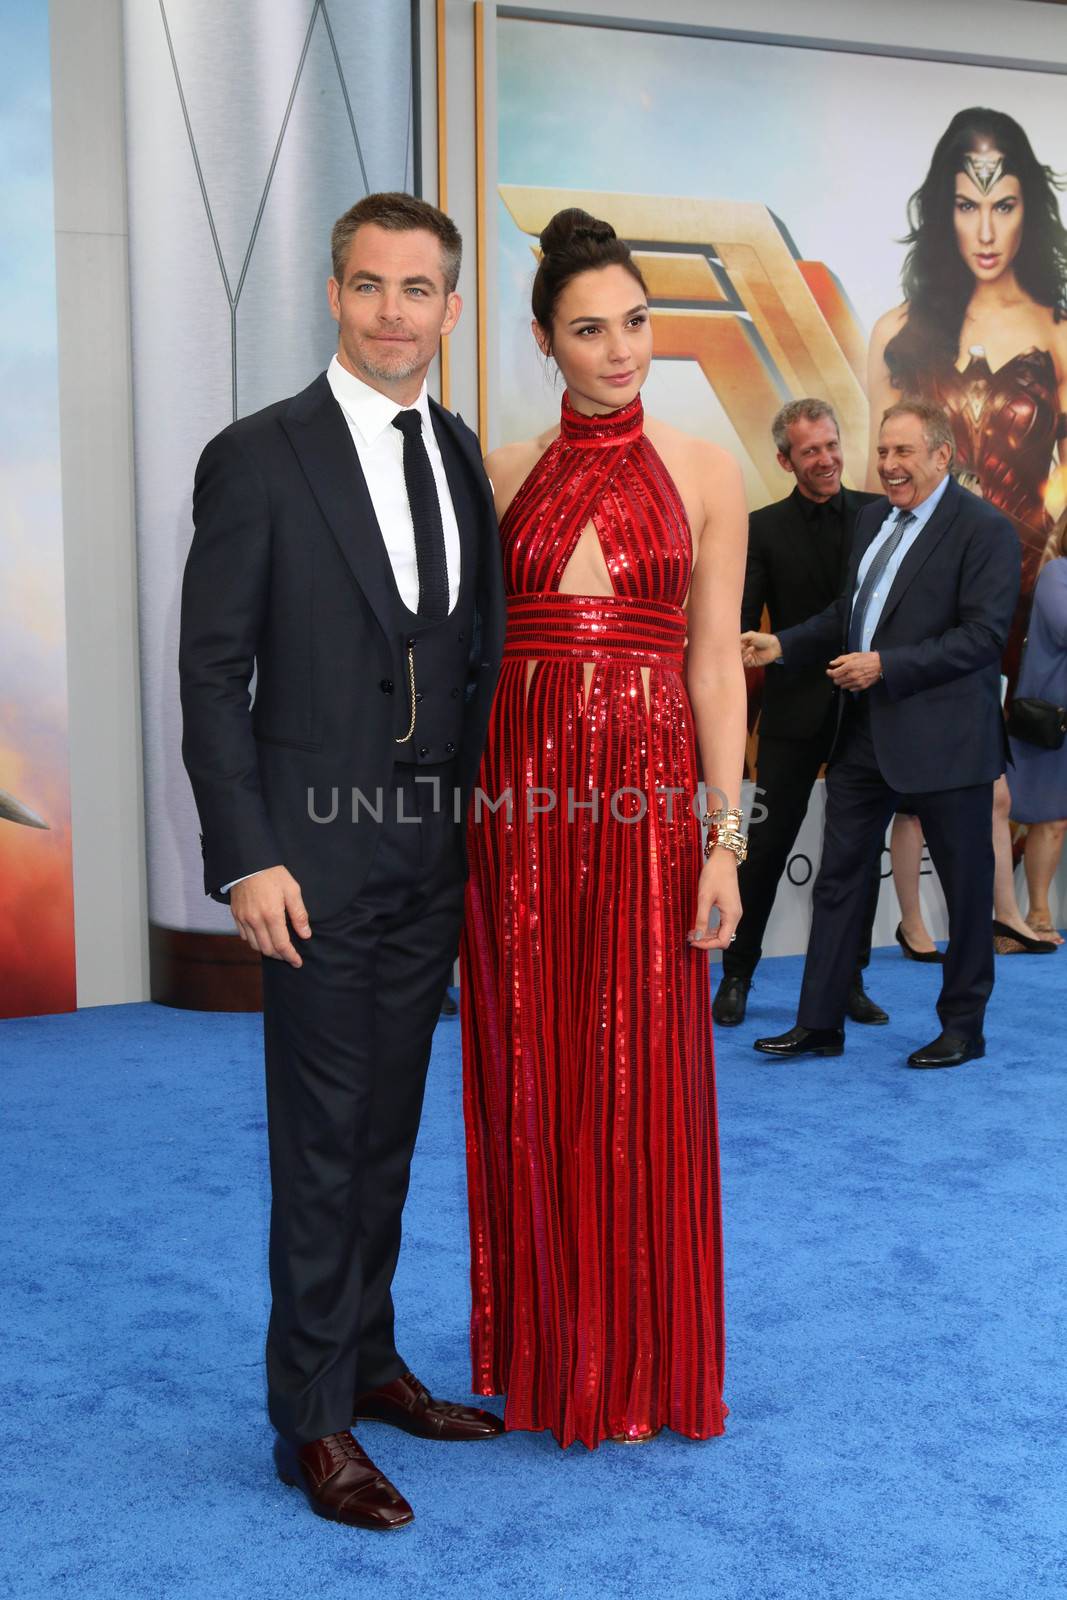 Chris Pine, Gal Gadot
at the "Wonder Woman" Premiere, Pantages, Hollywood, CA 05-25-17/ImageCollect by ImageCollect